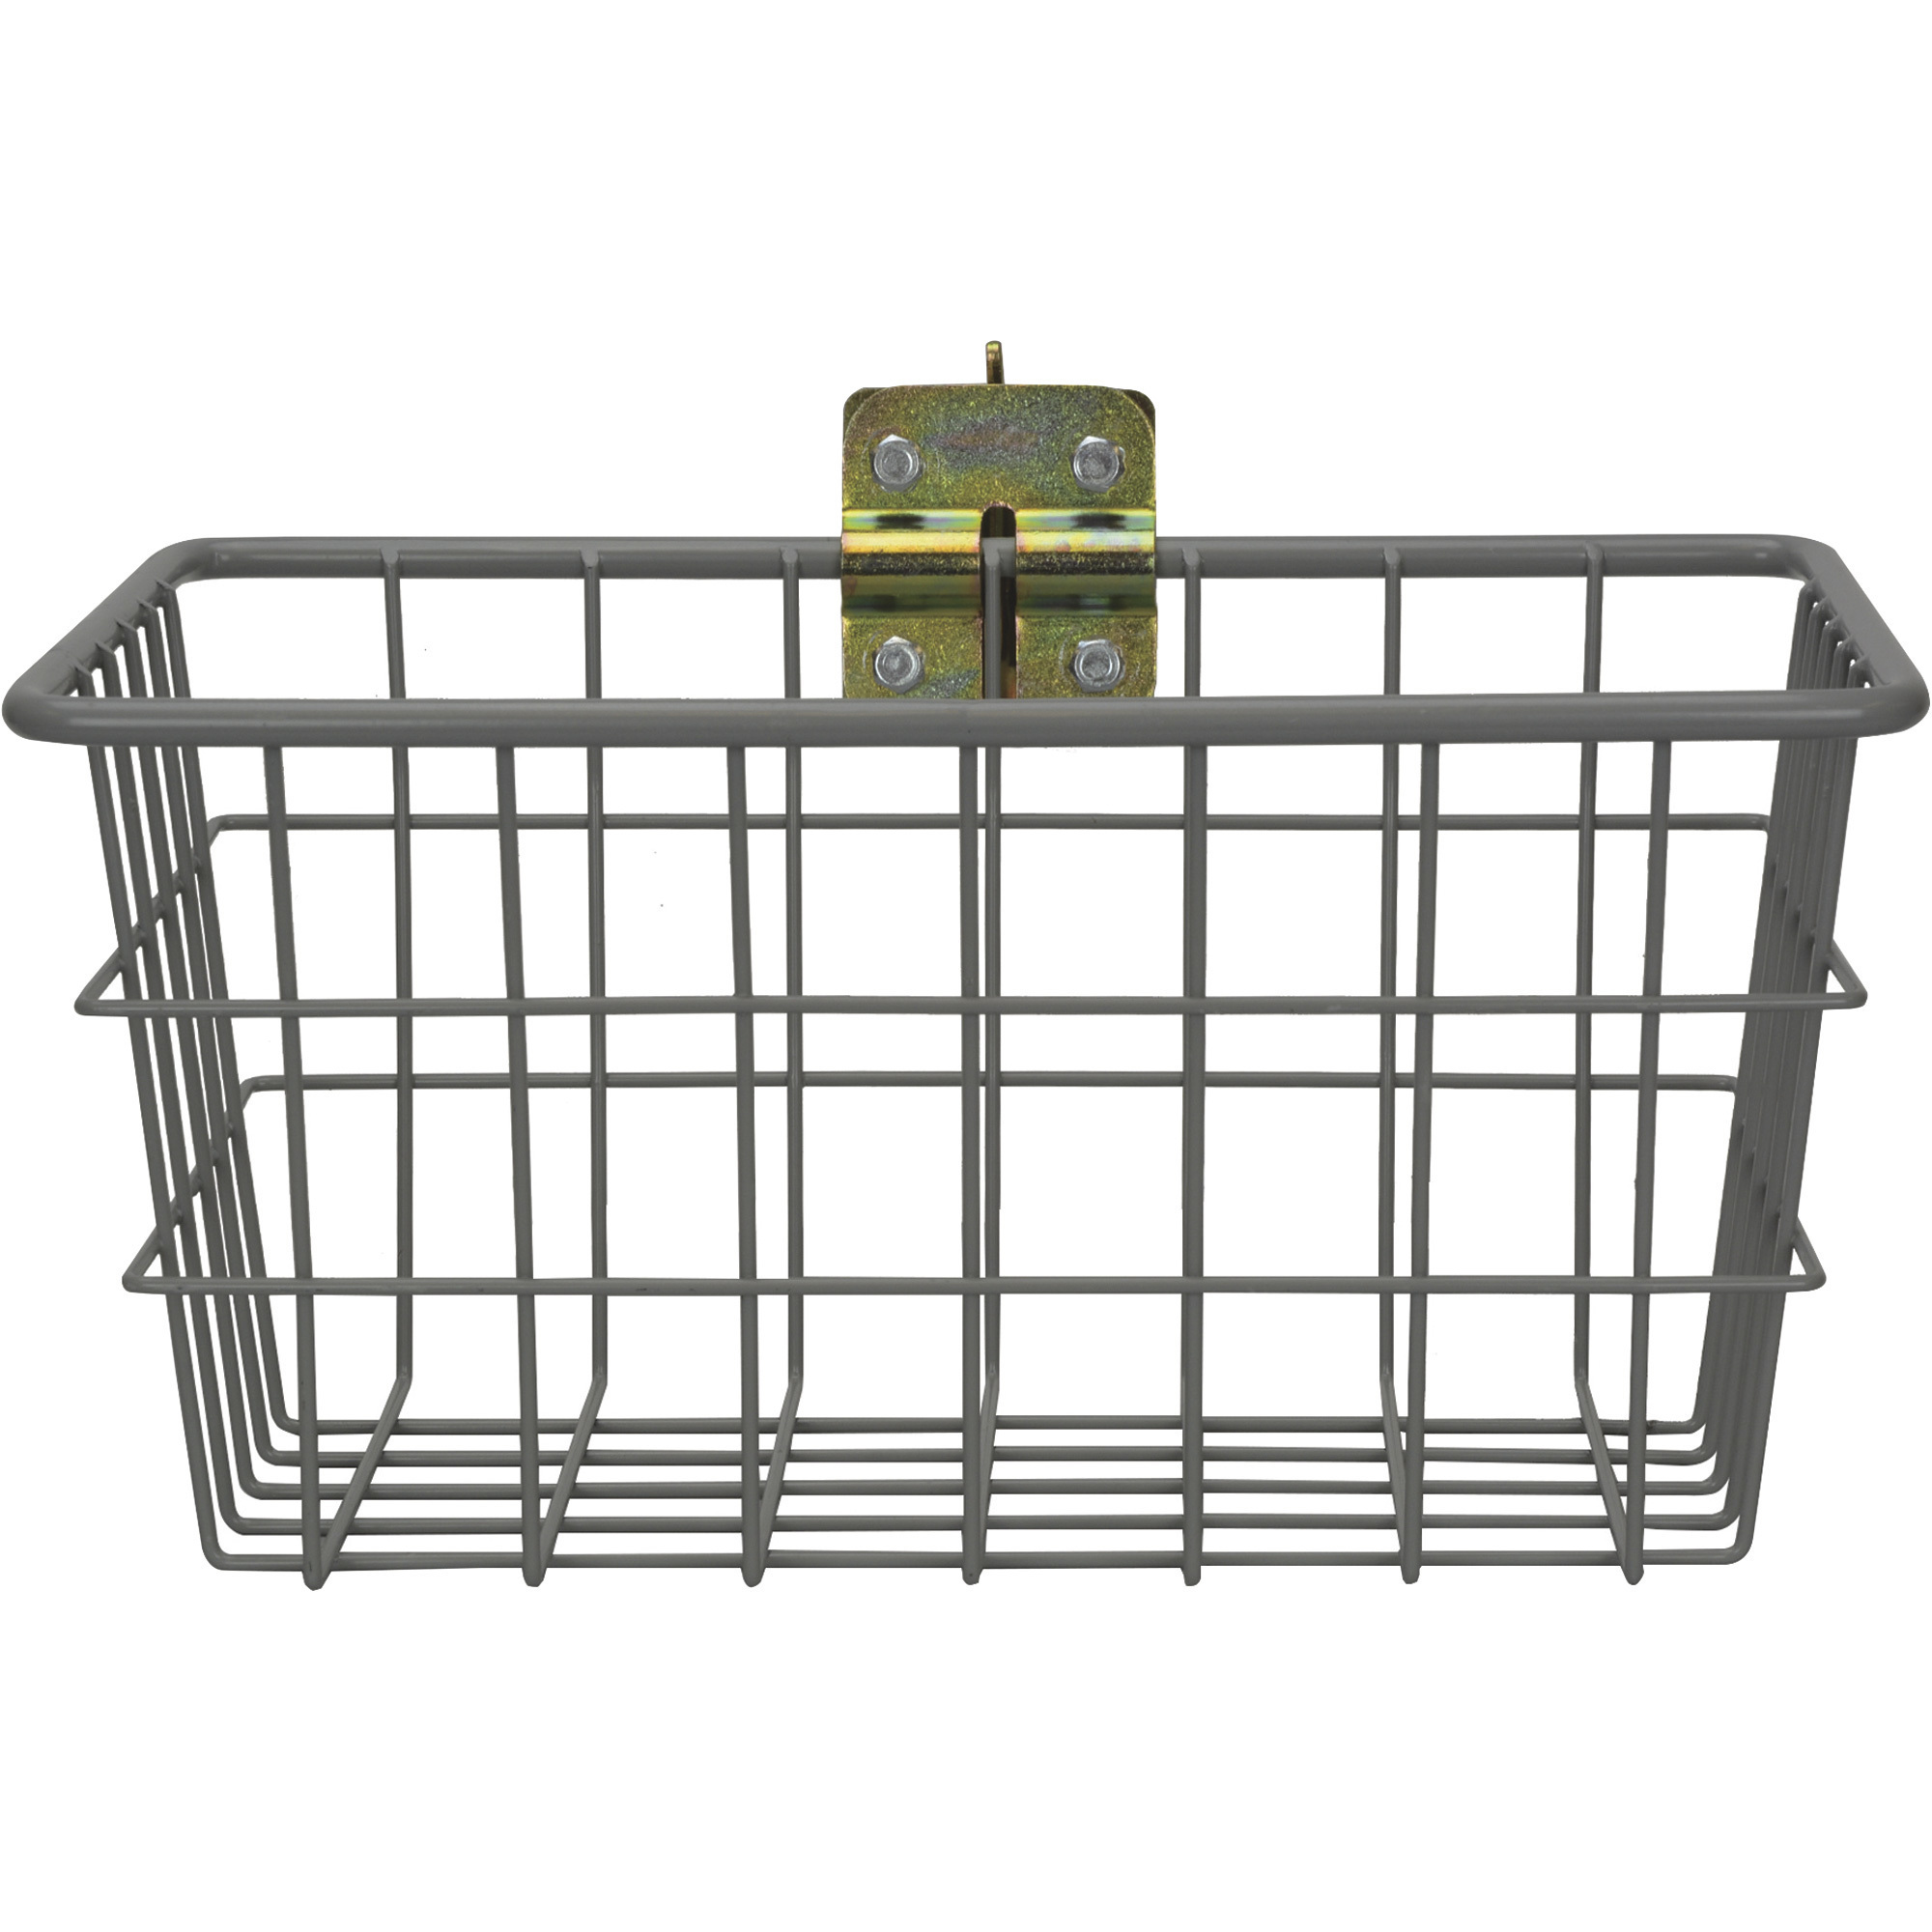 CargoSmart Small Wire Track Basket, 12Inch W x 6Inch D x 6Inch H, Coated Steel, For E-Track and X-Track